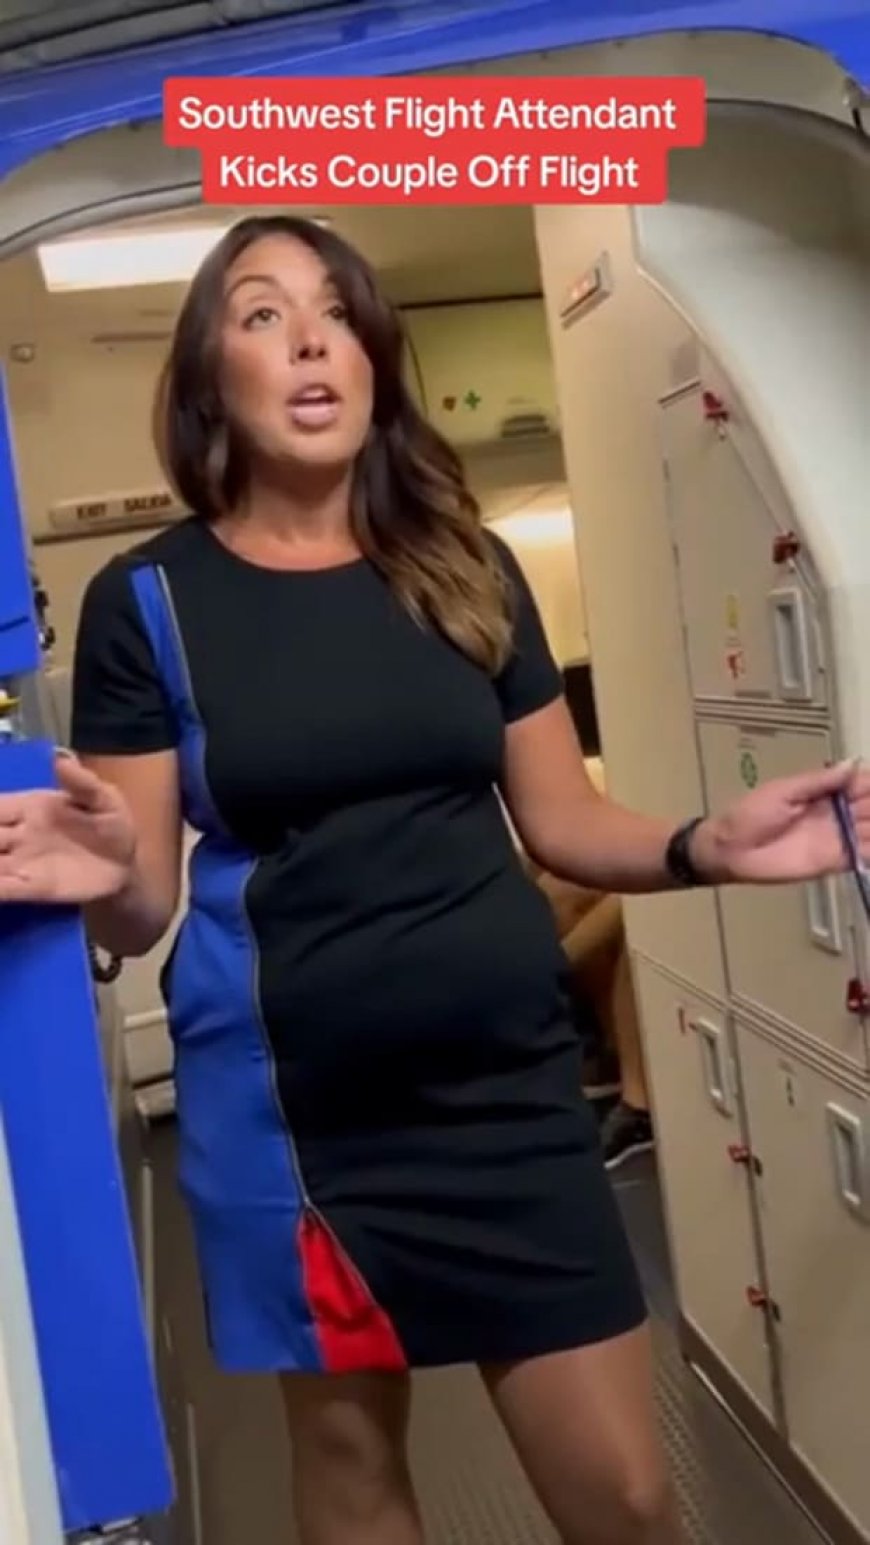 Caught on Camera: Flight Attendant Bans Couple From Boarding Plane in Uncomfortable Exchange